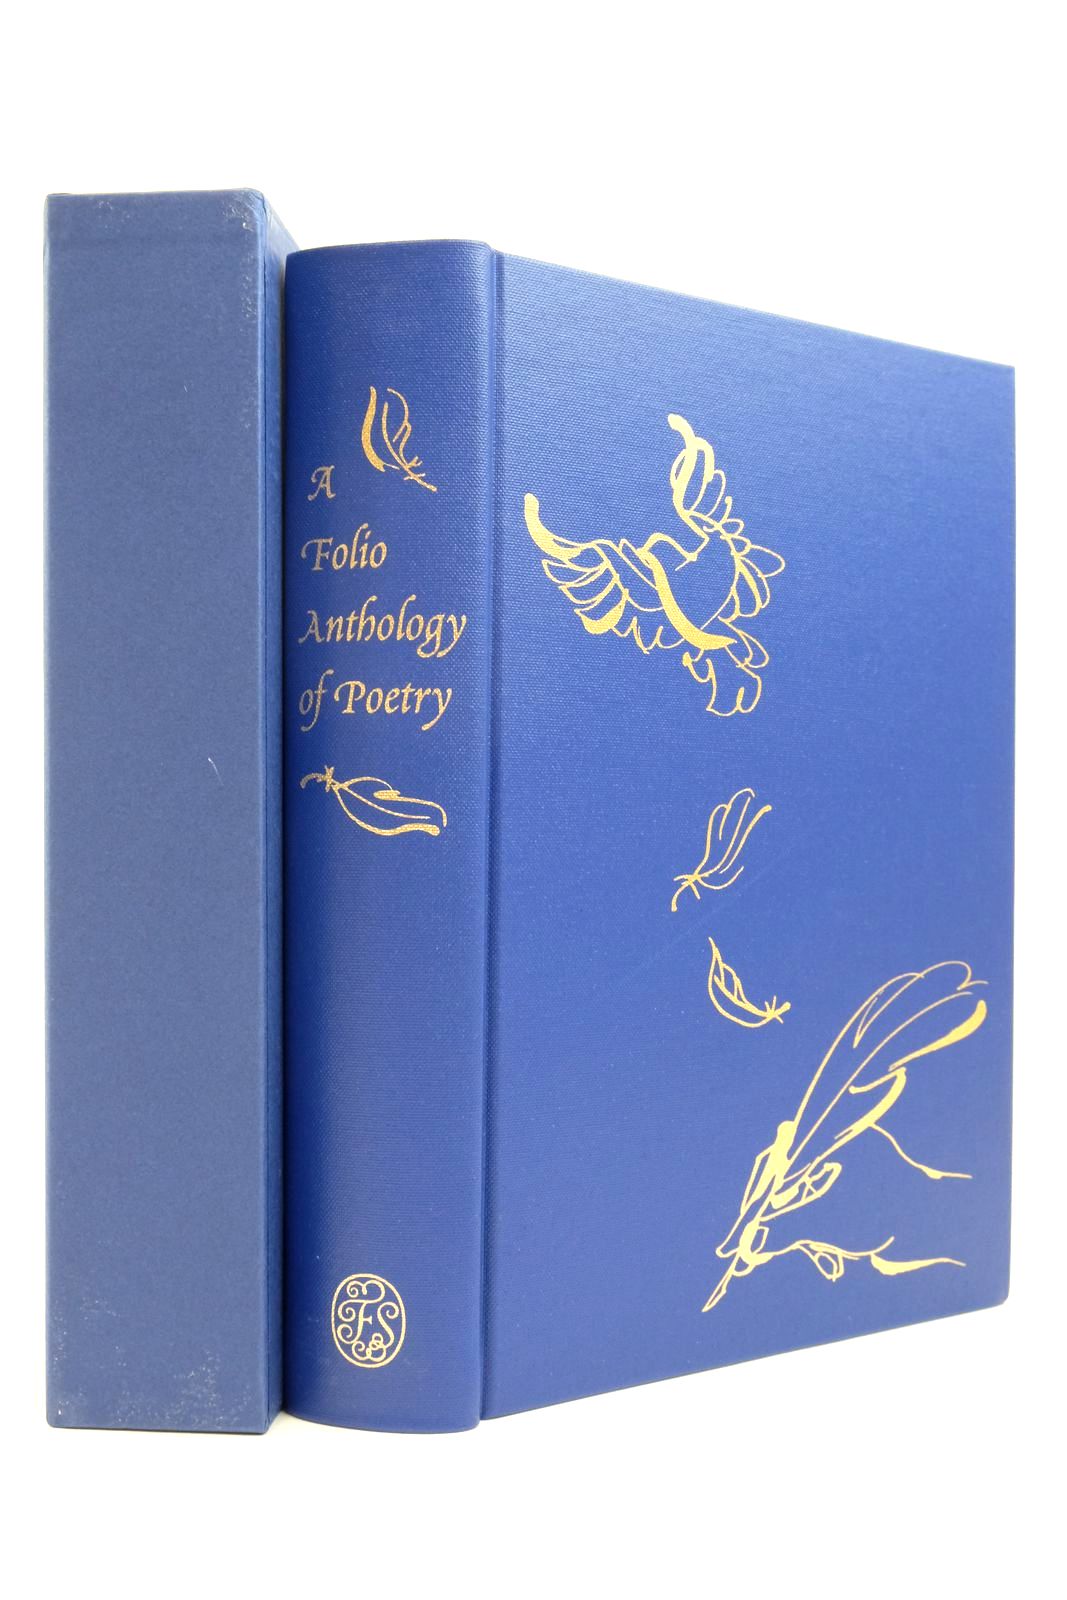 Photo of A FOLIO ANTHOLOGY OF POETRY written by Duffy, Carol Ann illustrated by Griffin, Eri published by Folio Society (STOCK CODE: 2138446)  for sale by Stella & Rose's Books